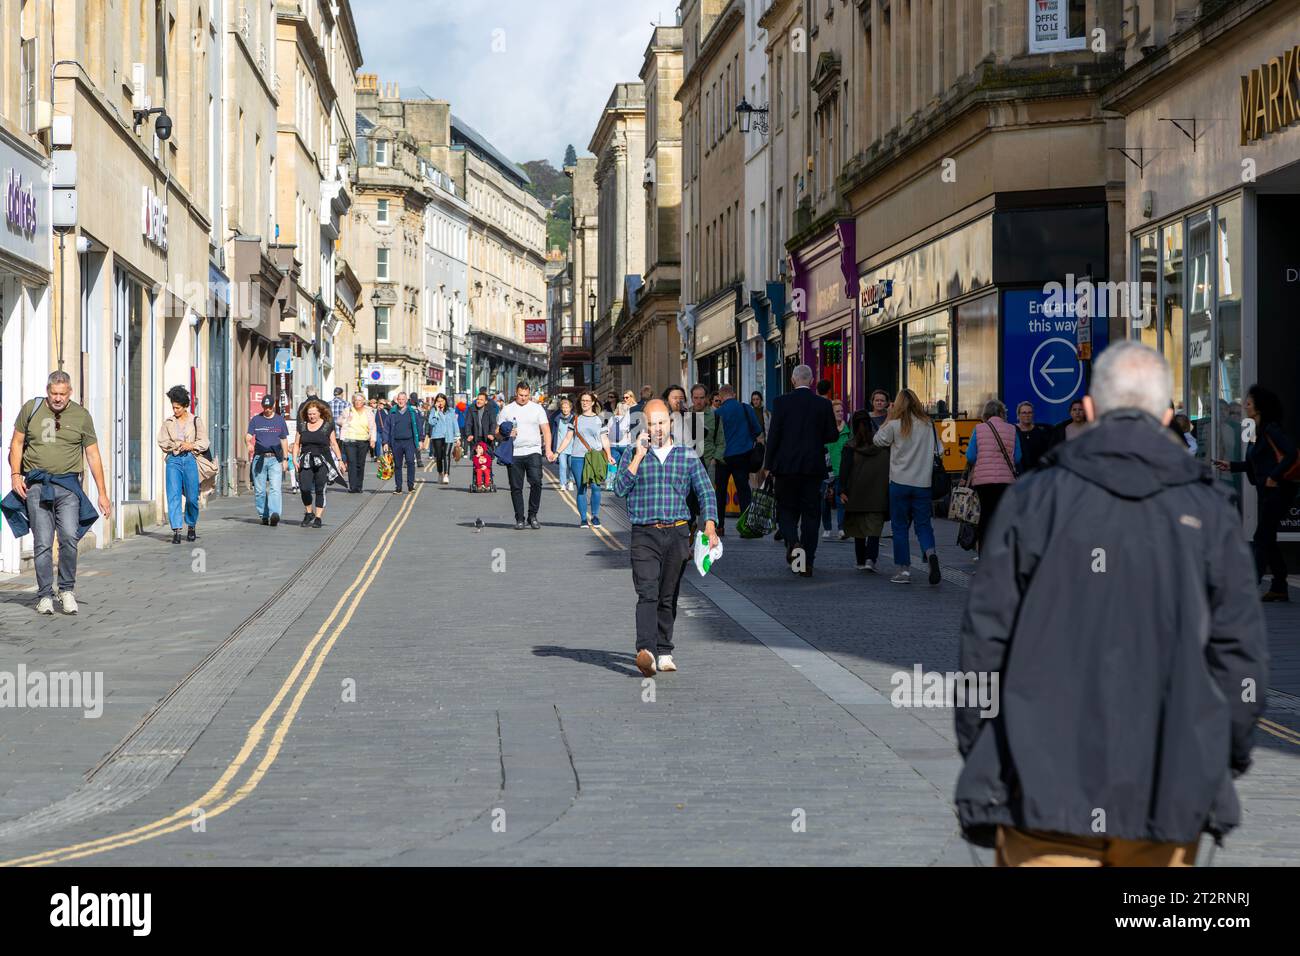 Shoppers walking in pedestrianised street in city centre, Stall Street, Bath, Somerset, England, UK Stock Photo